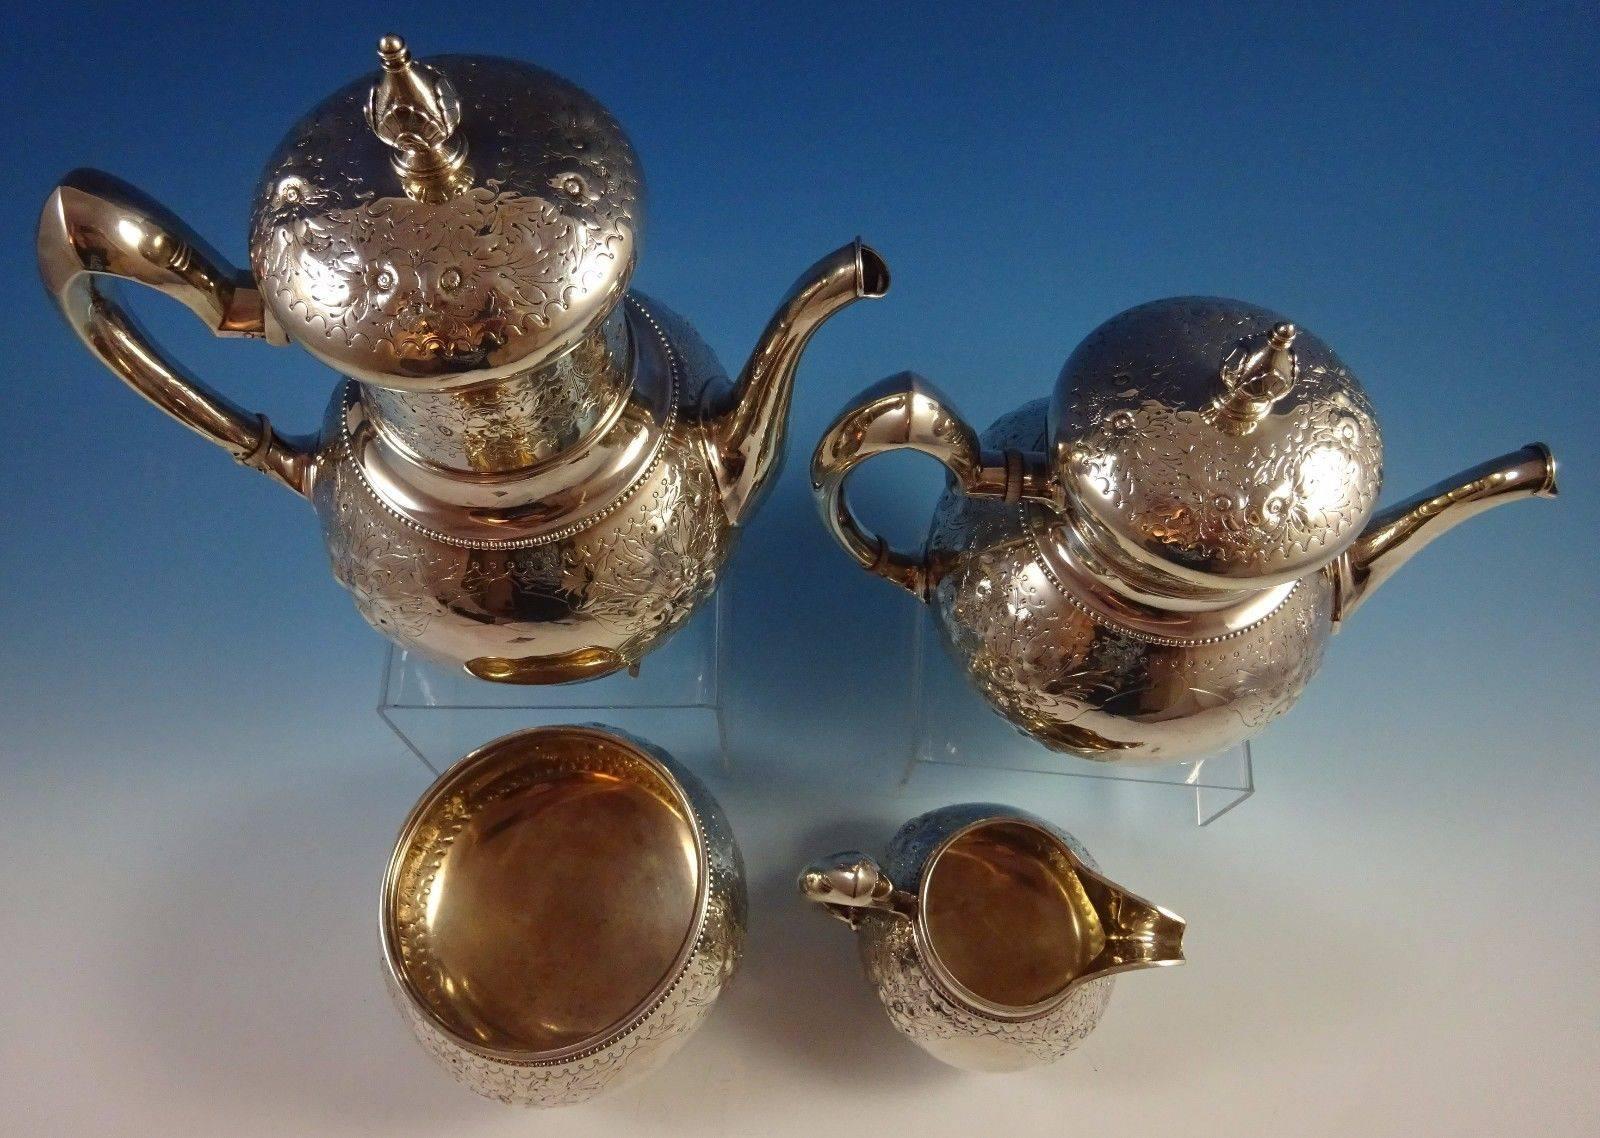 Whiting.

Beautiful whiting sterling silver four-piece tea set. It features repoussed flowers and hand engraved detail. All pieces are marked with an 